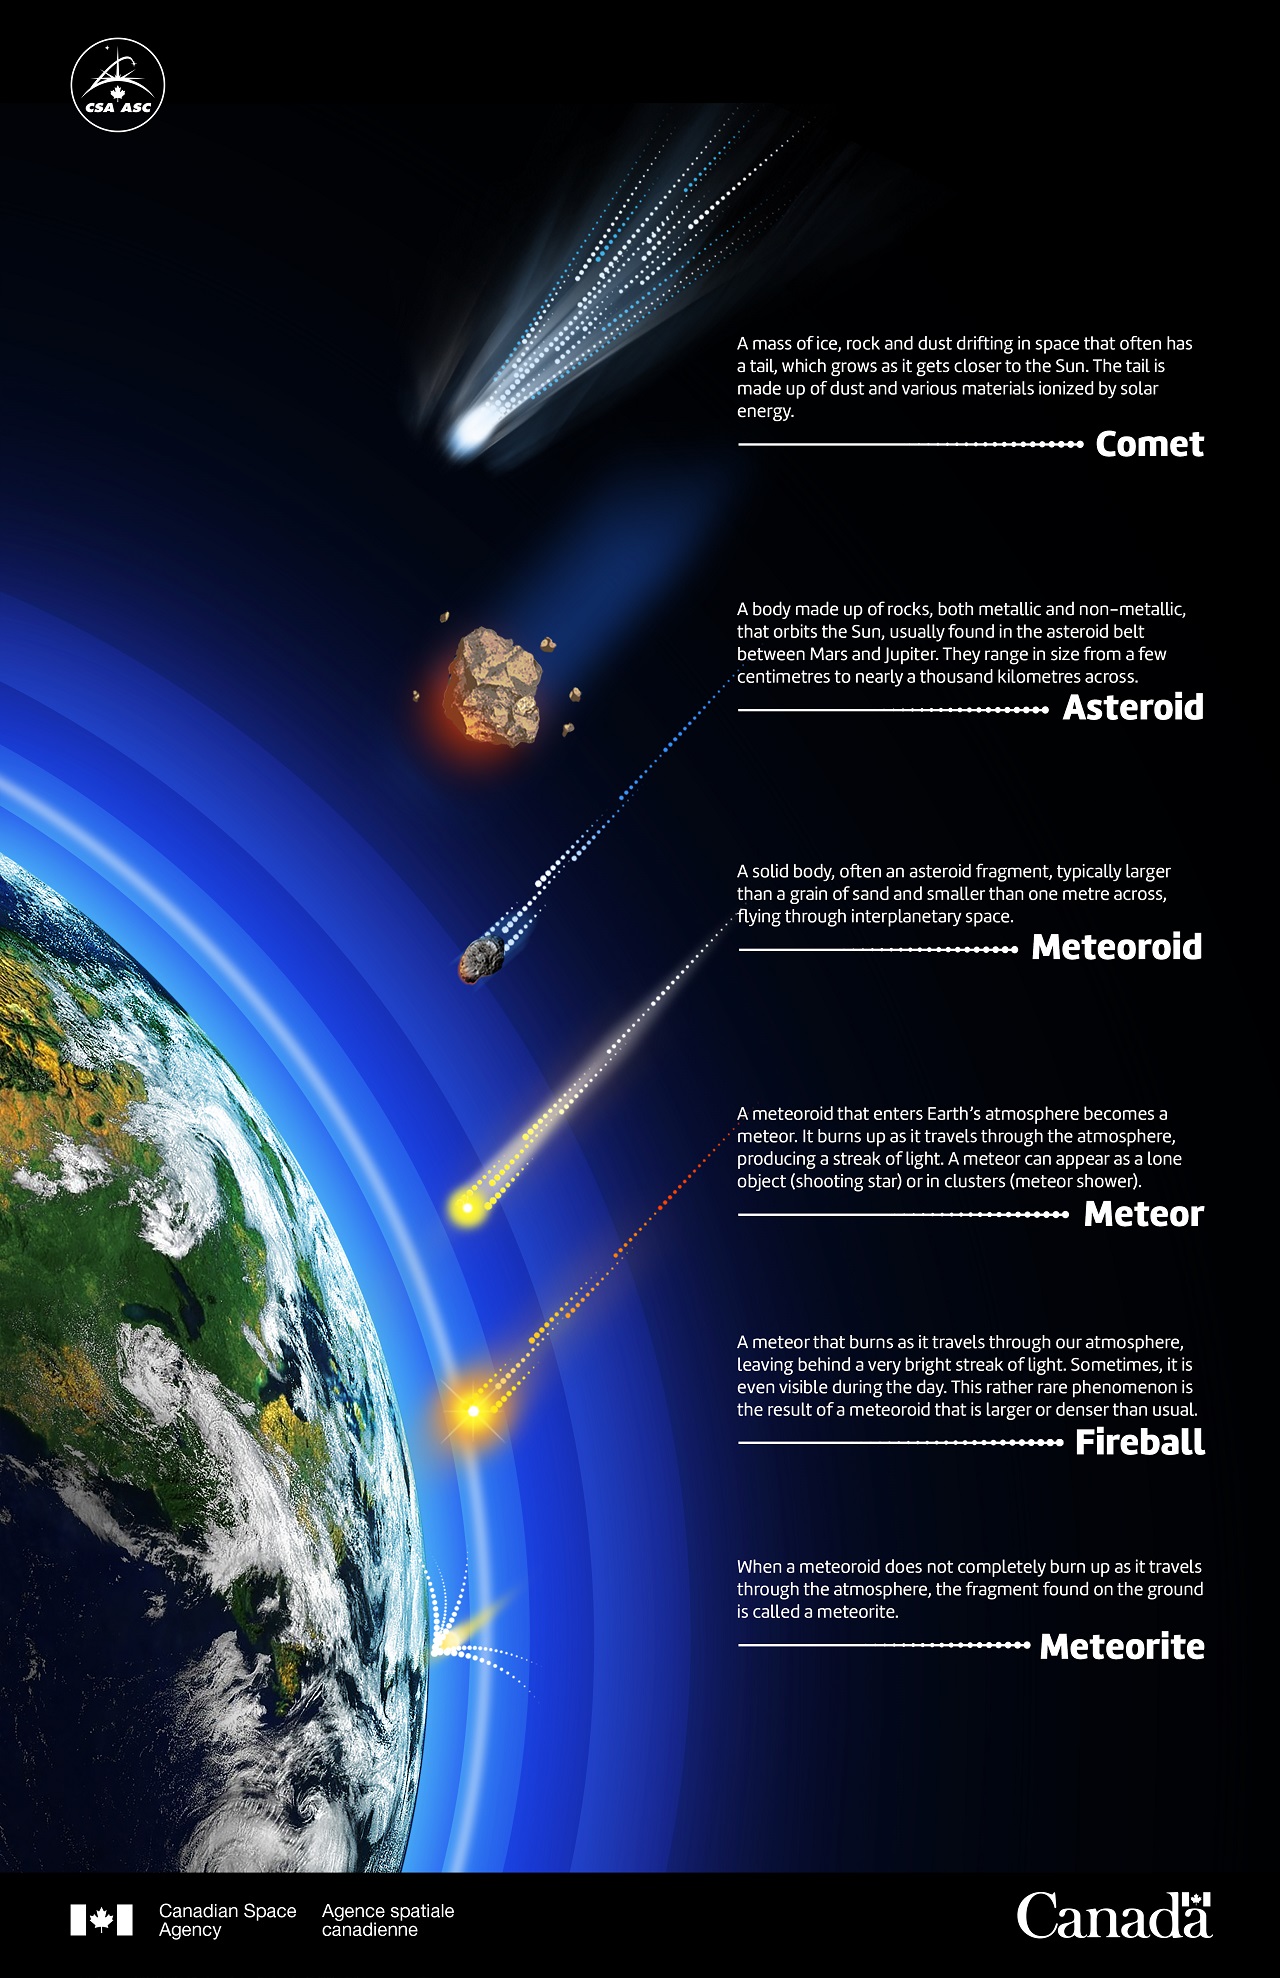 2015-08-12 - Illustration providing an overview of the characteristics of comets, asteroids, meteoroids, meteors, fireballs and meteorites. (Credit: Canadian Space Agency)